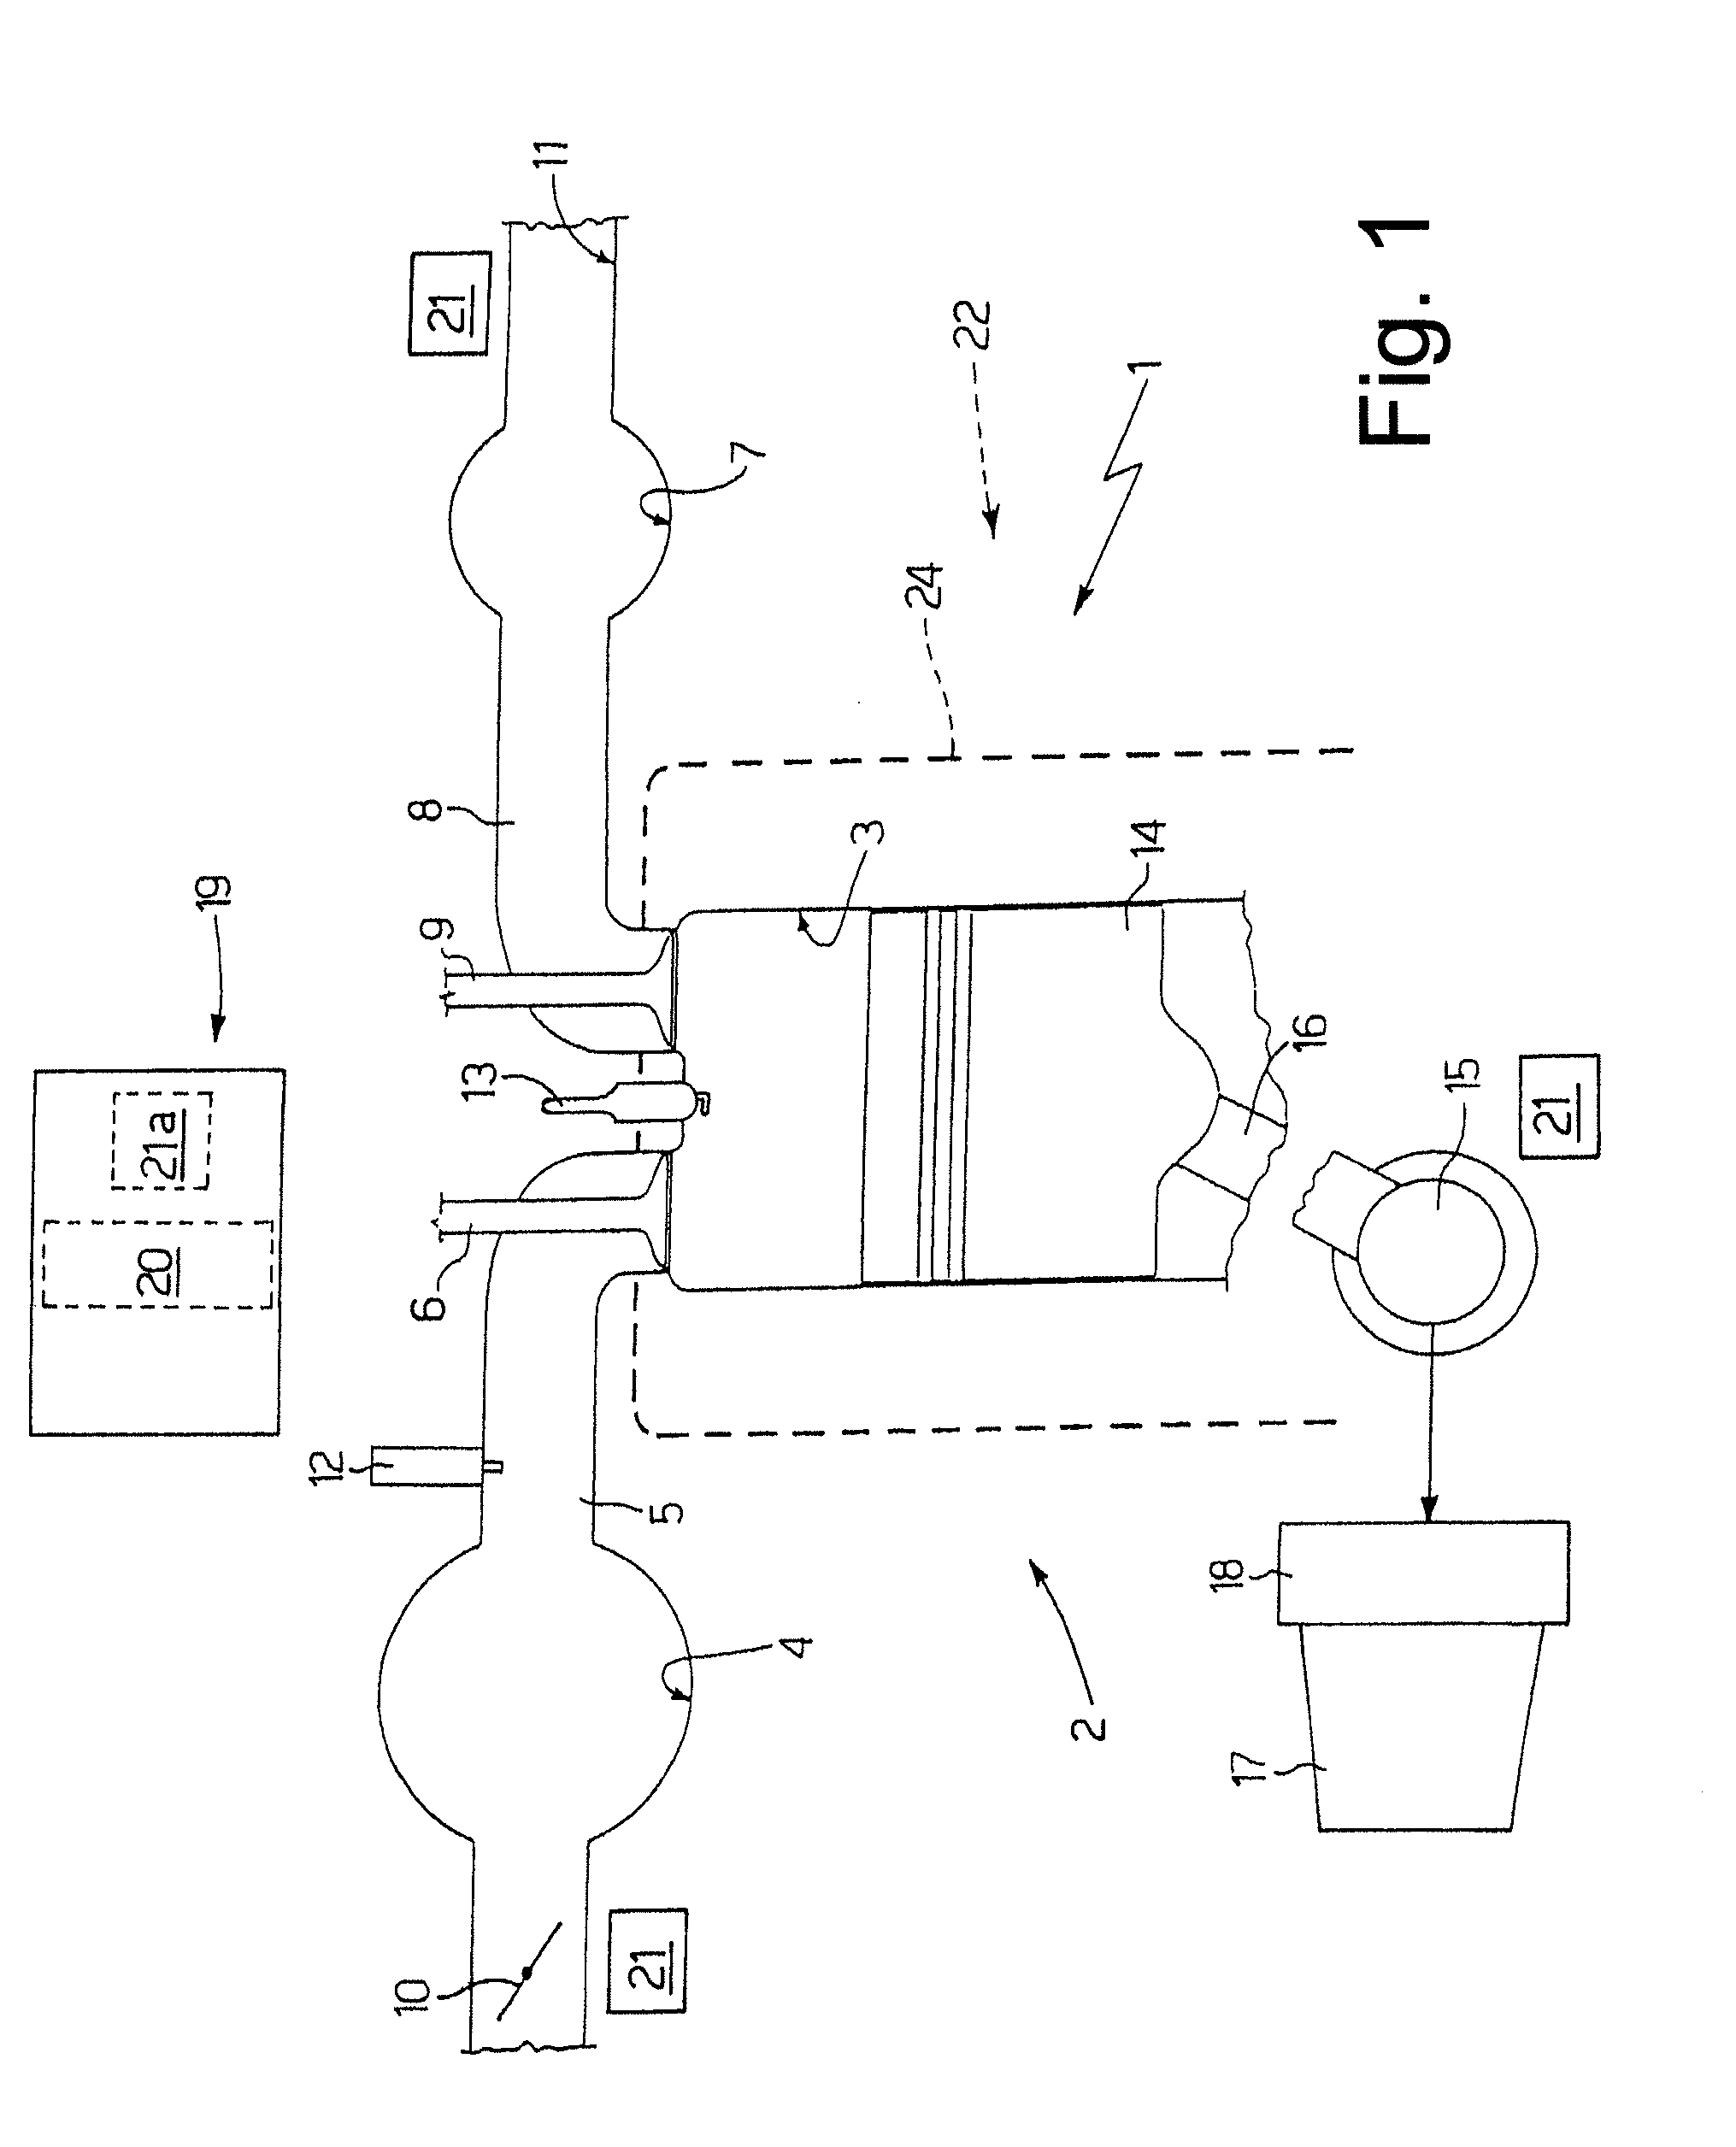 Method of microphone signal controlling an internal combustion engine